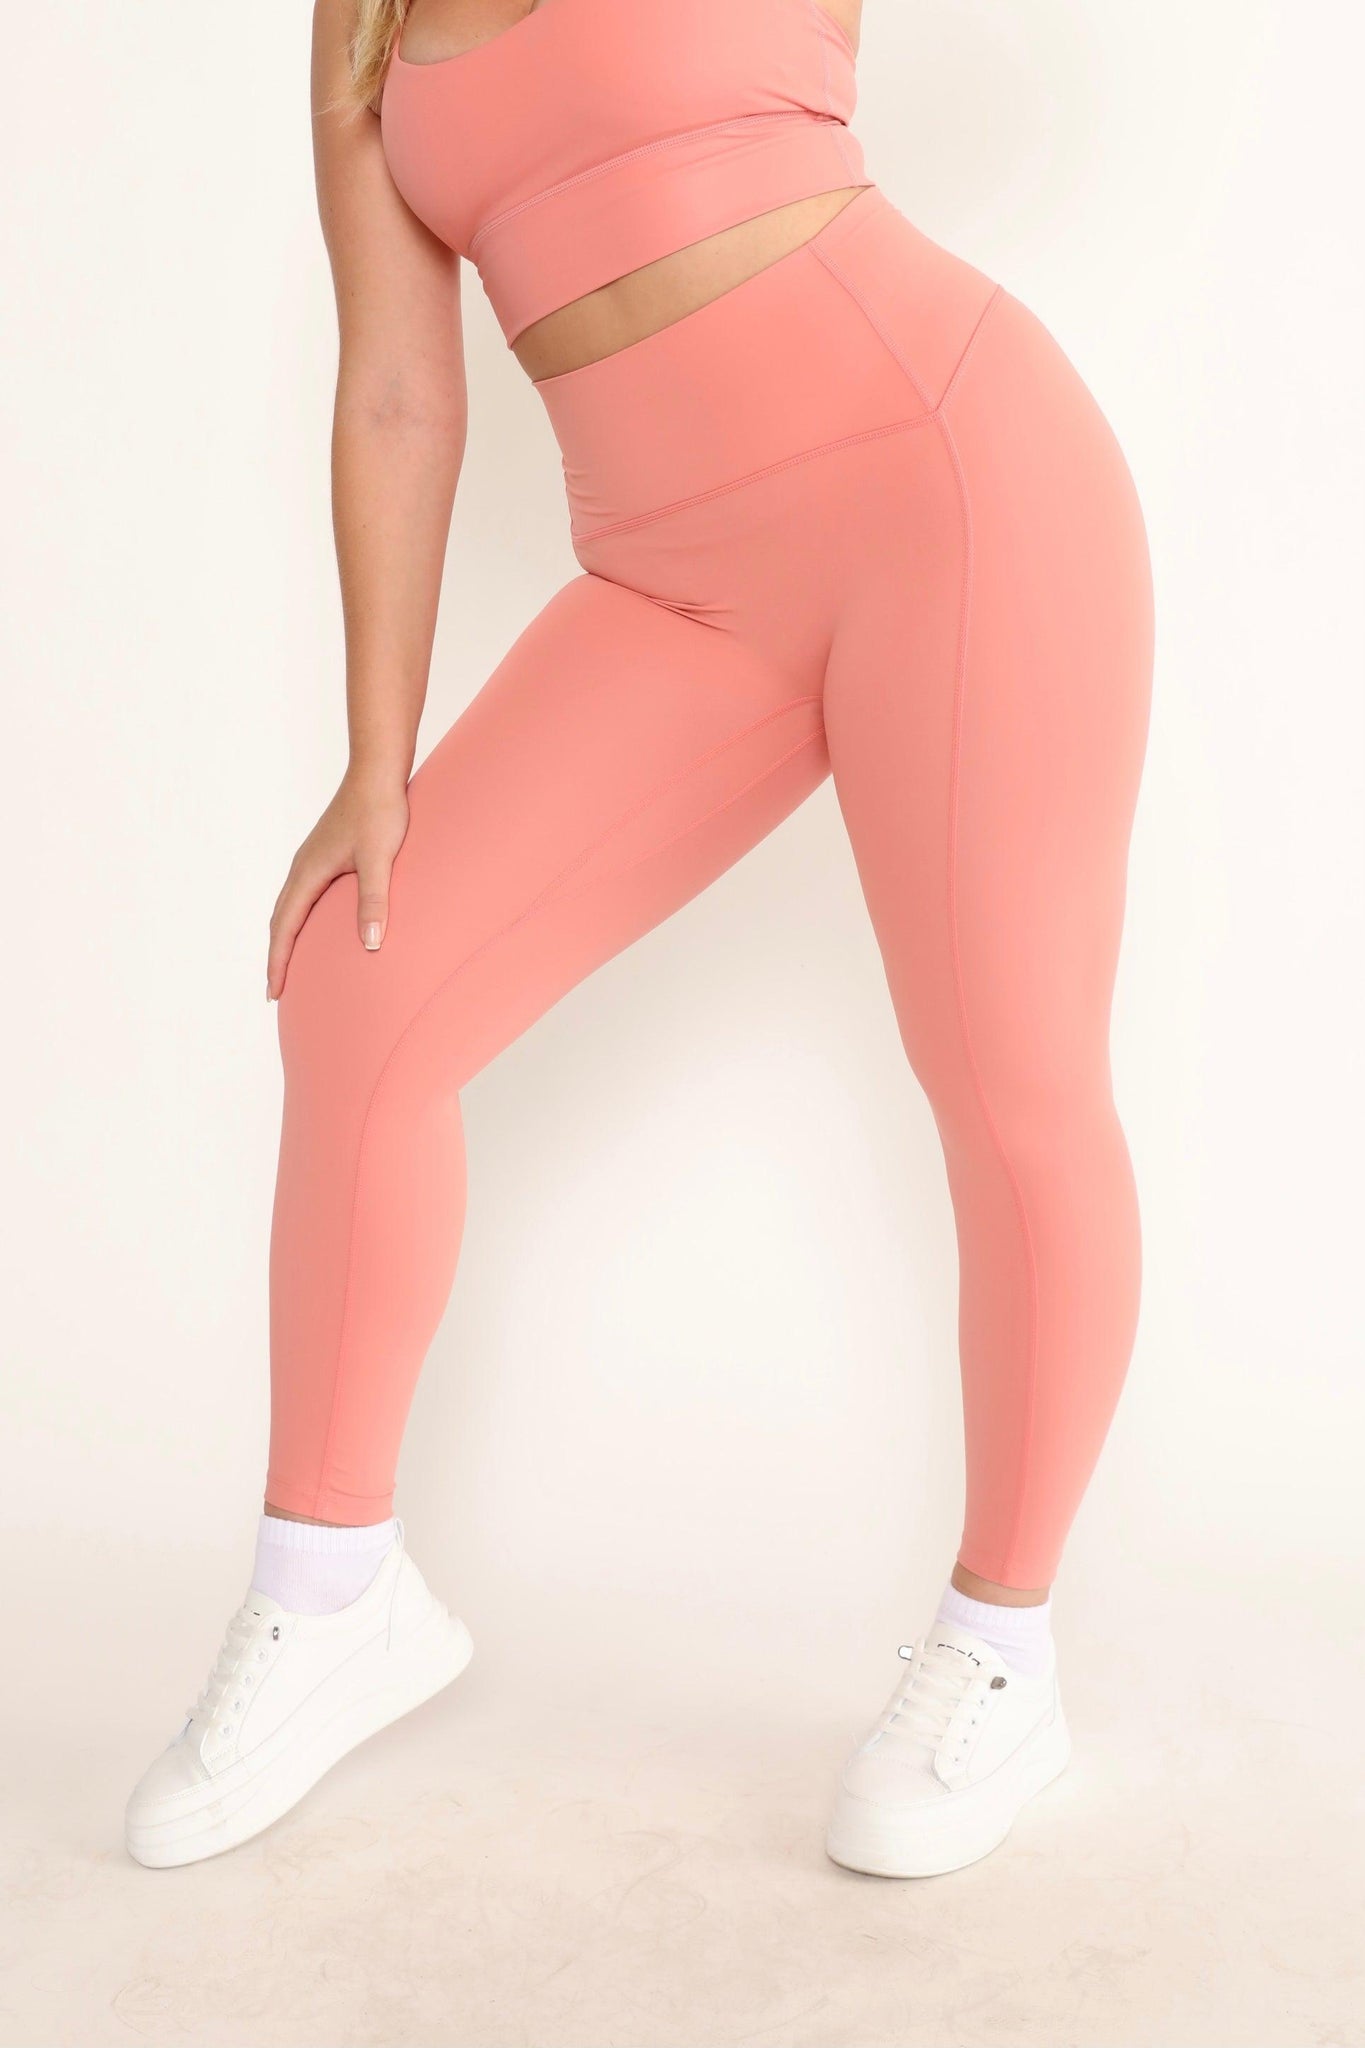 JUV unicorn legging in pink color, close up front/side view.